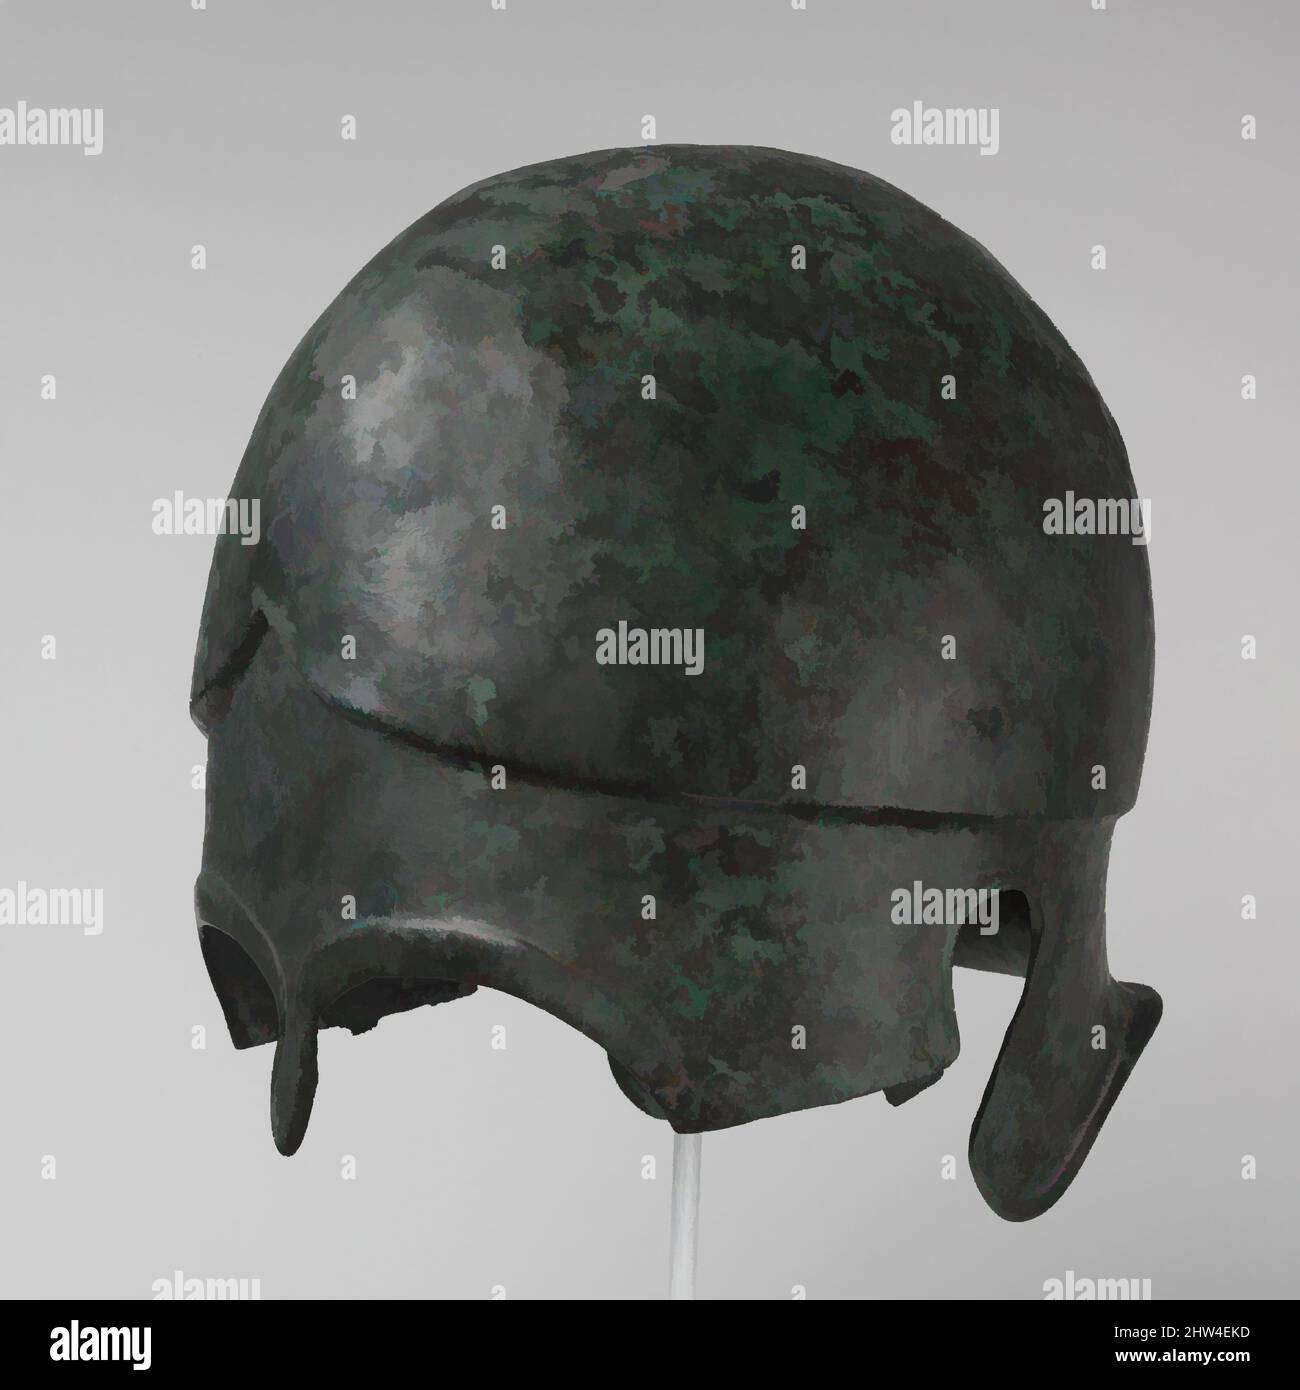 PUBG Level 3 Helmet Is About To Become Super Rare